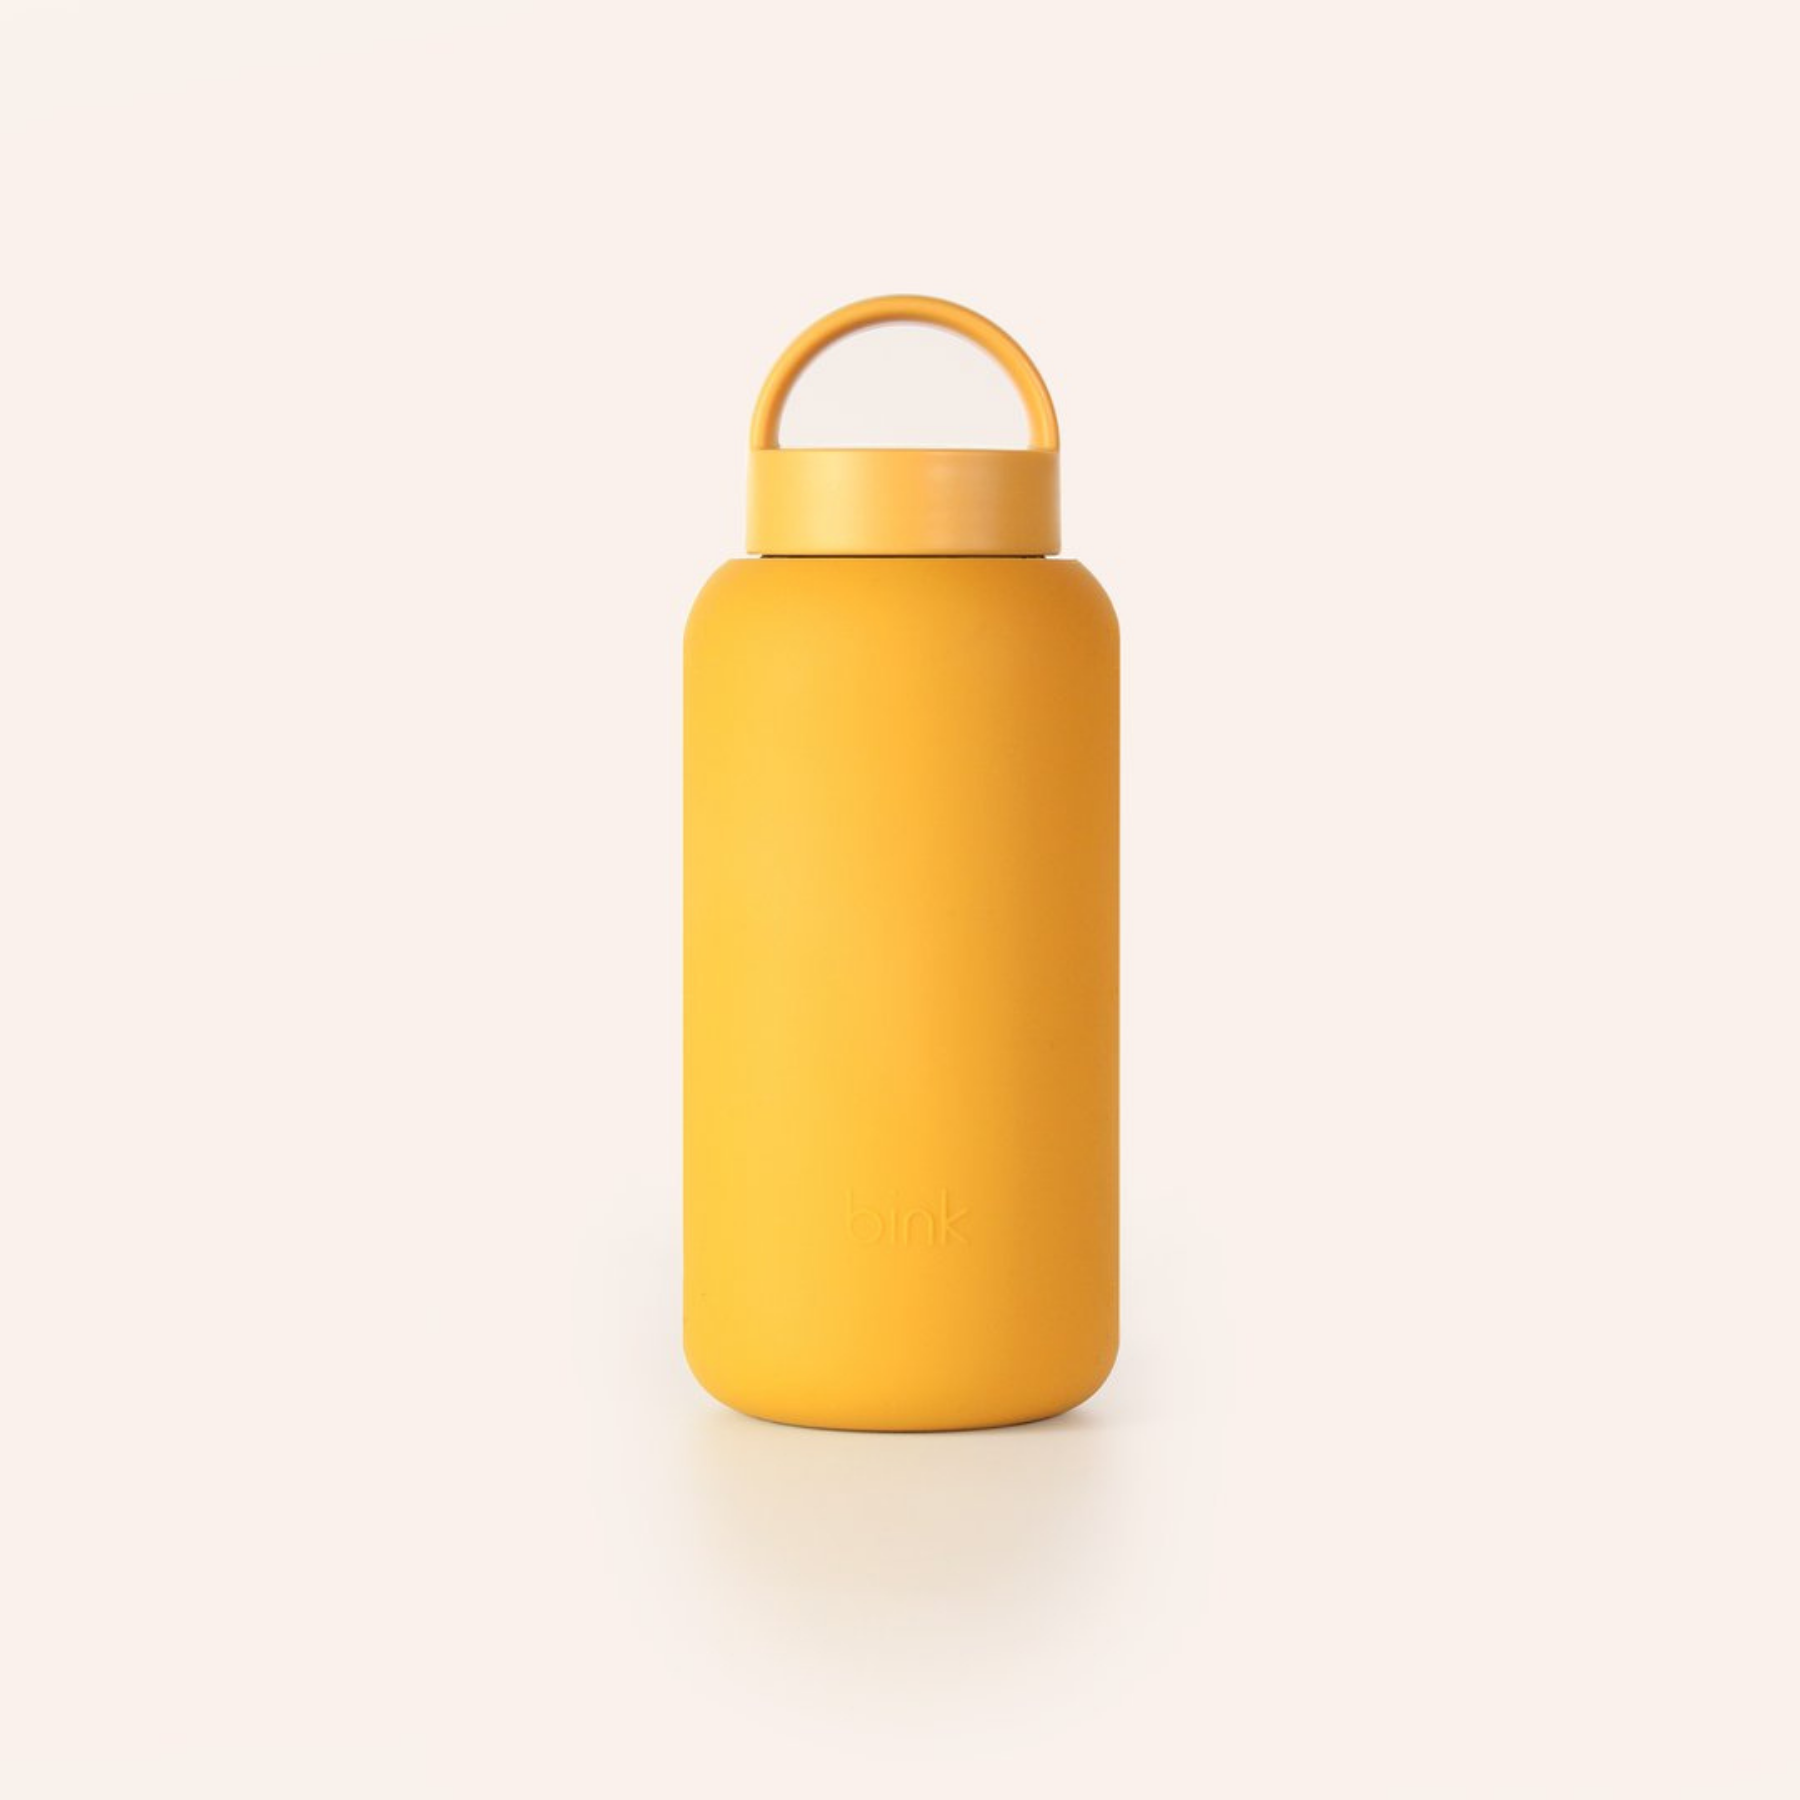 DAY BOTTLE | The Hydration Tracking Bottle